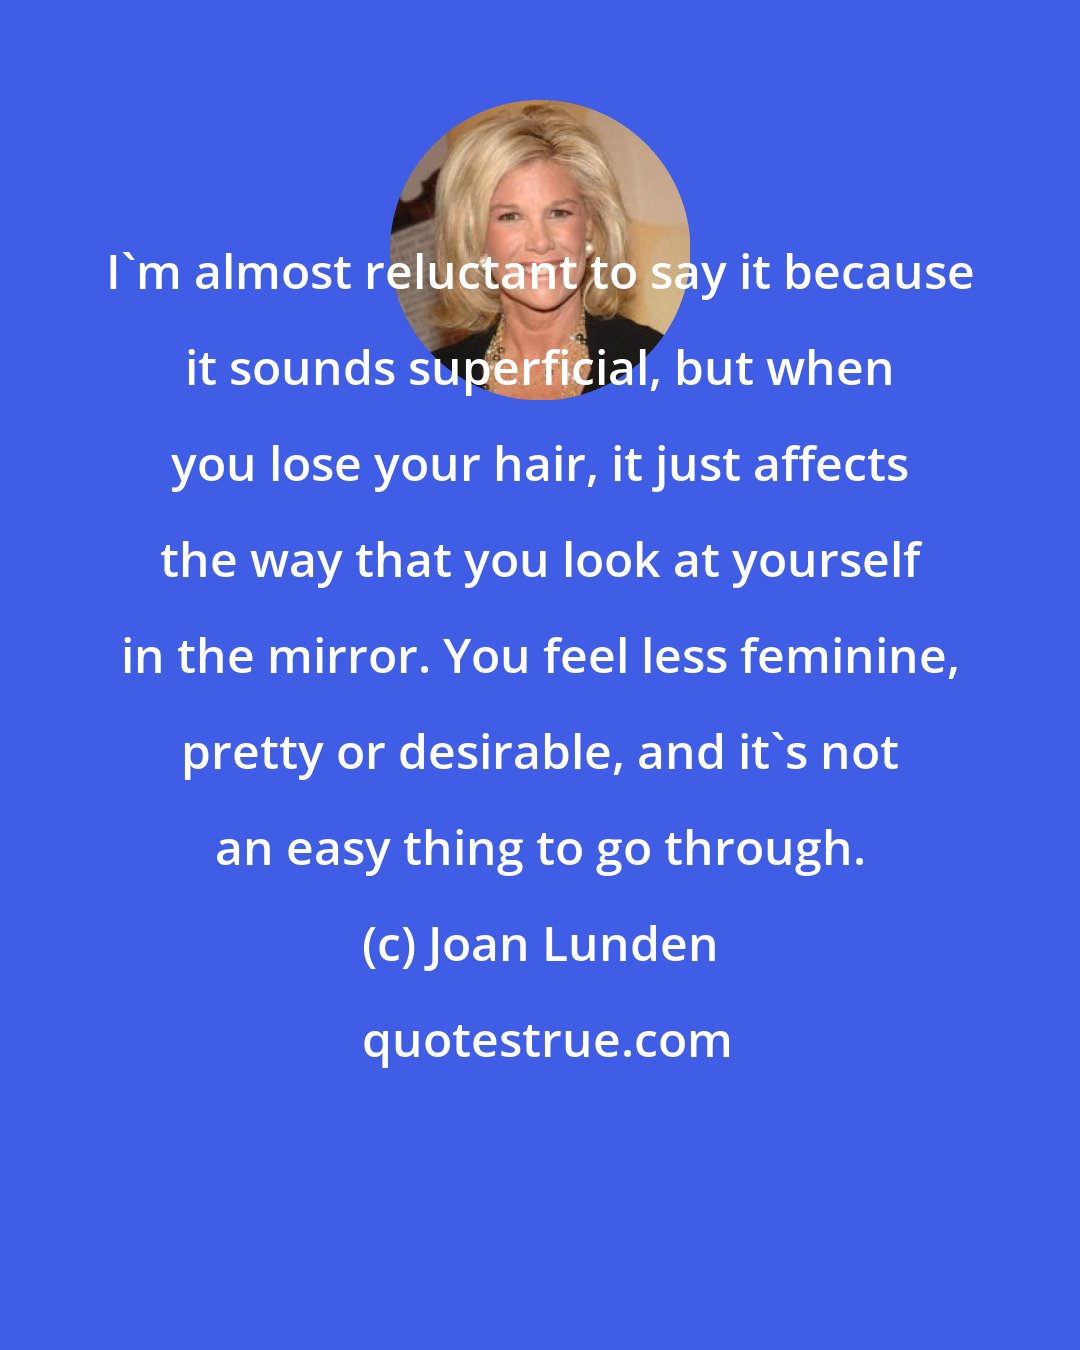 Joan Lunden: I'm almost reluctant to say it because it sounds superficial, but when you lose your hair, it just affects the way that you look at yourself in the mirror. You feel less feminine, pretty or desirable, and it's not an easy thing to go through.